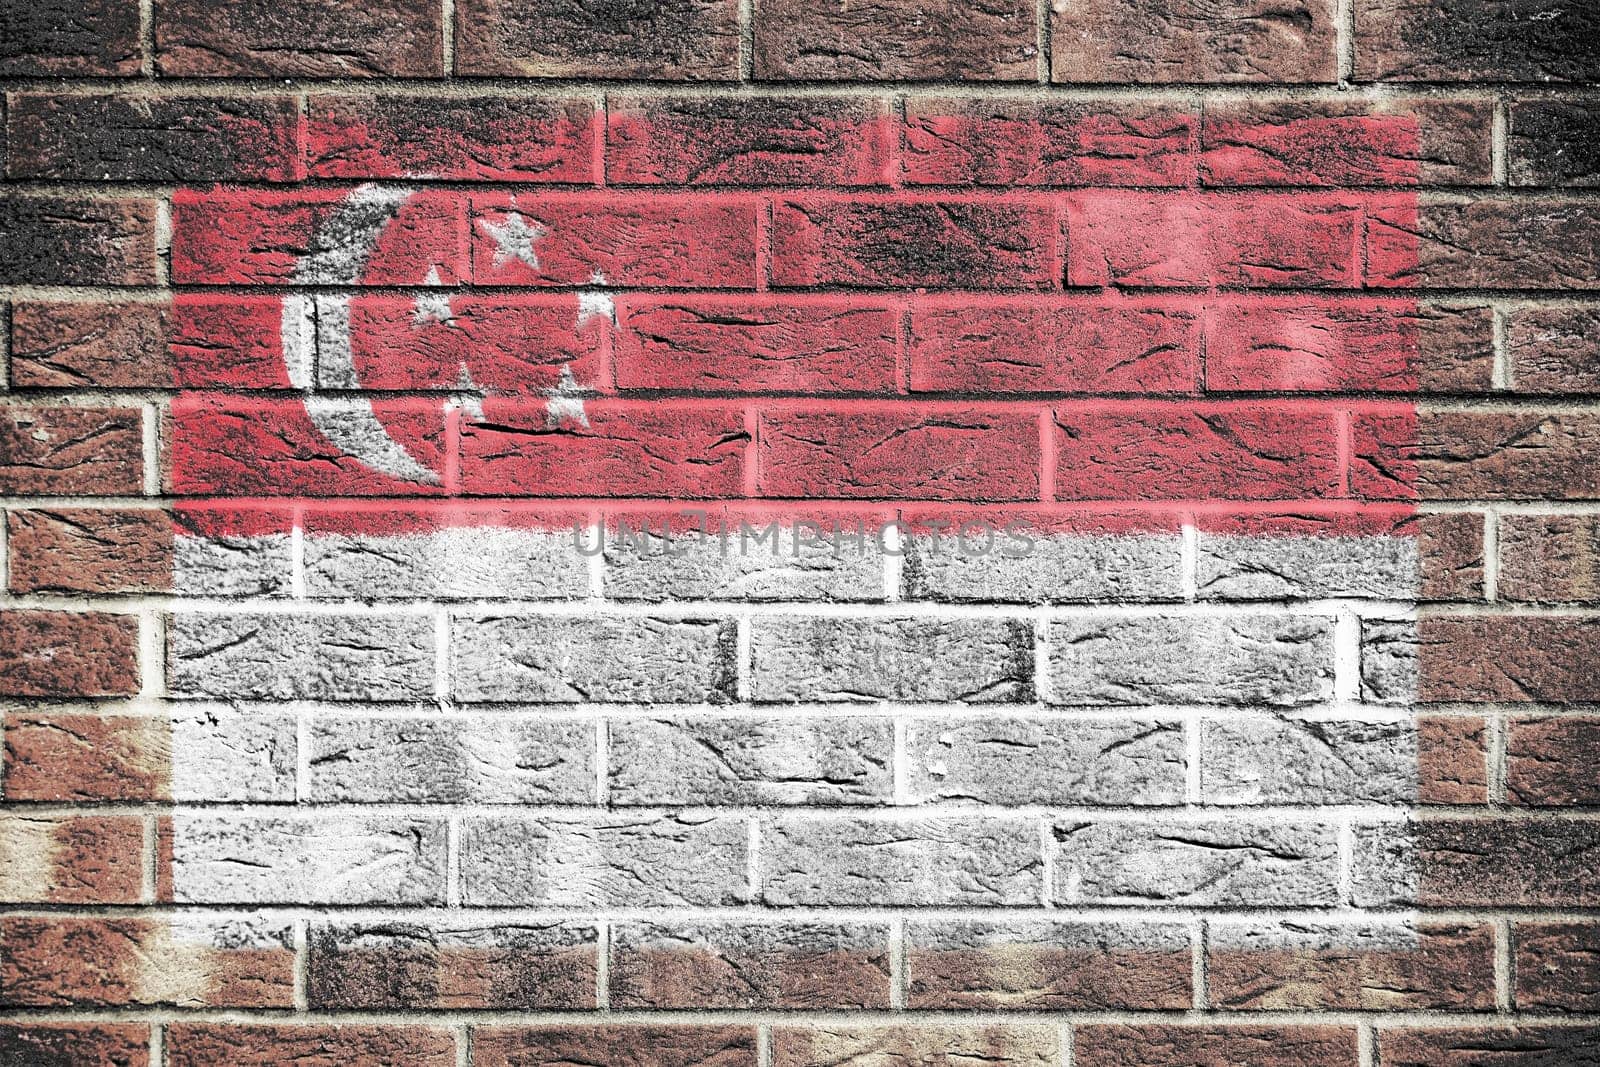 Singapore flag on old brick wall background by VivacityImages